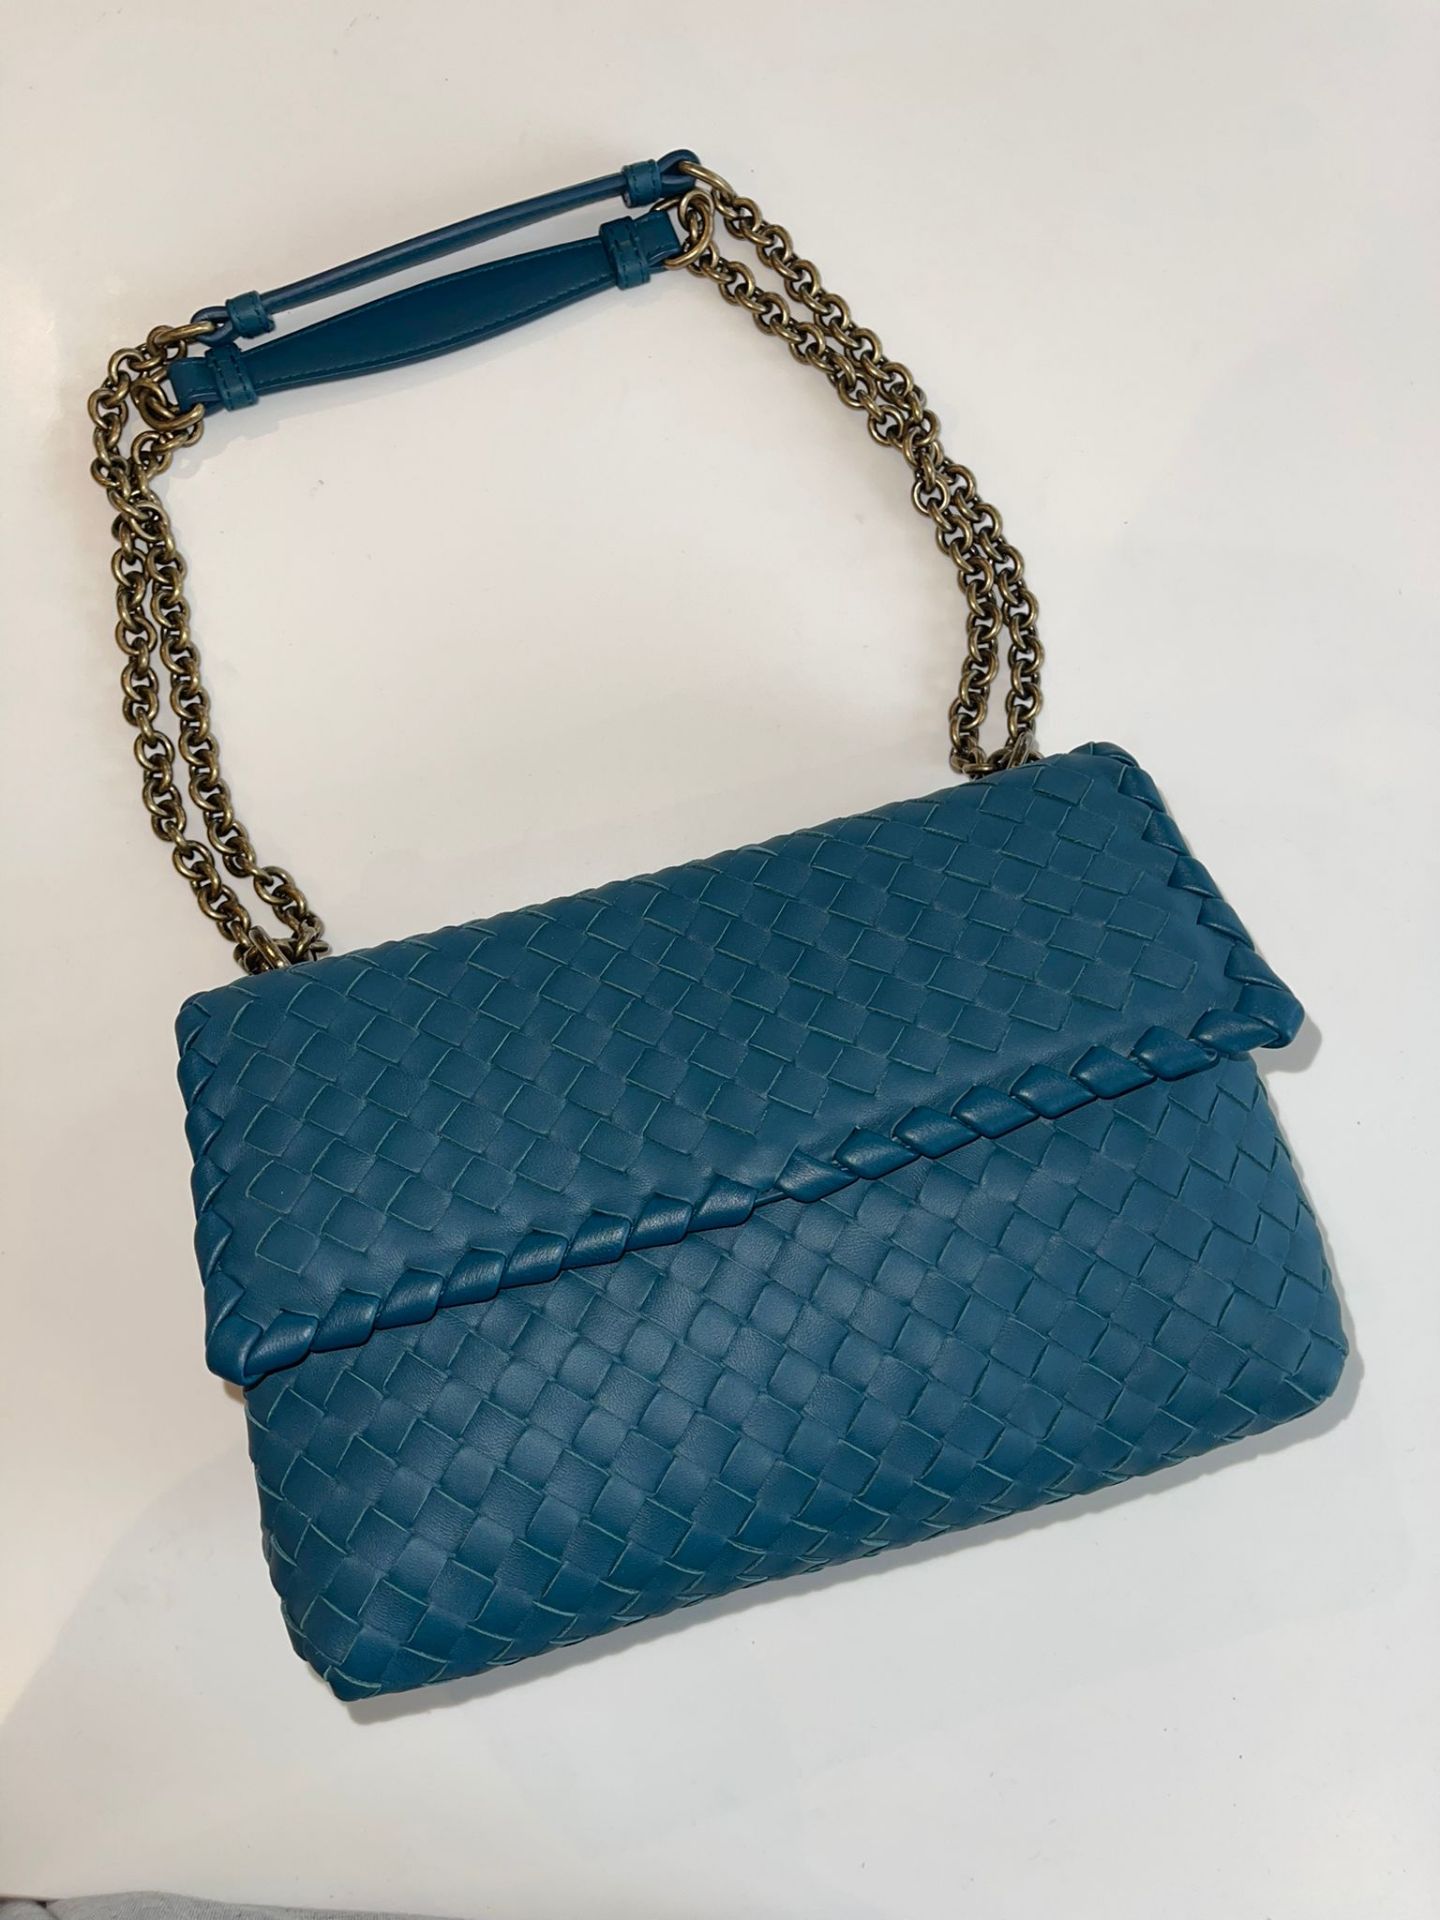 Bottega Veneta weave Shoulder Bag. RRP £2,875. Stylish, luxury & a stand out piece from the